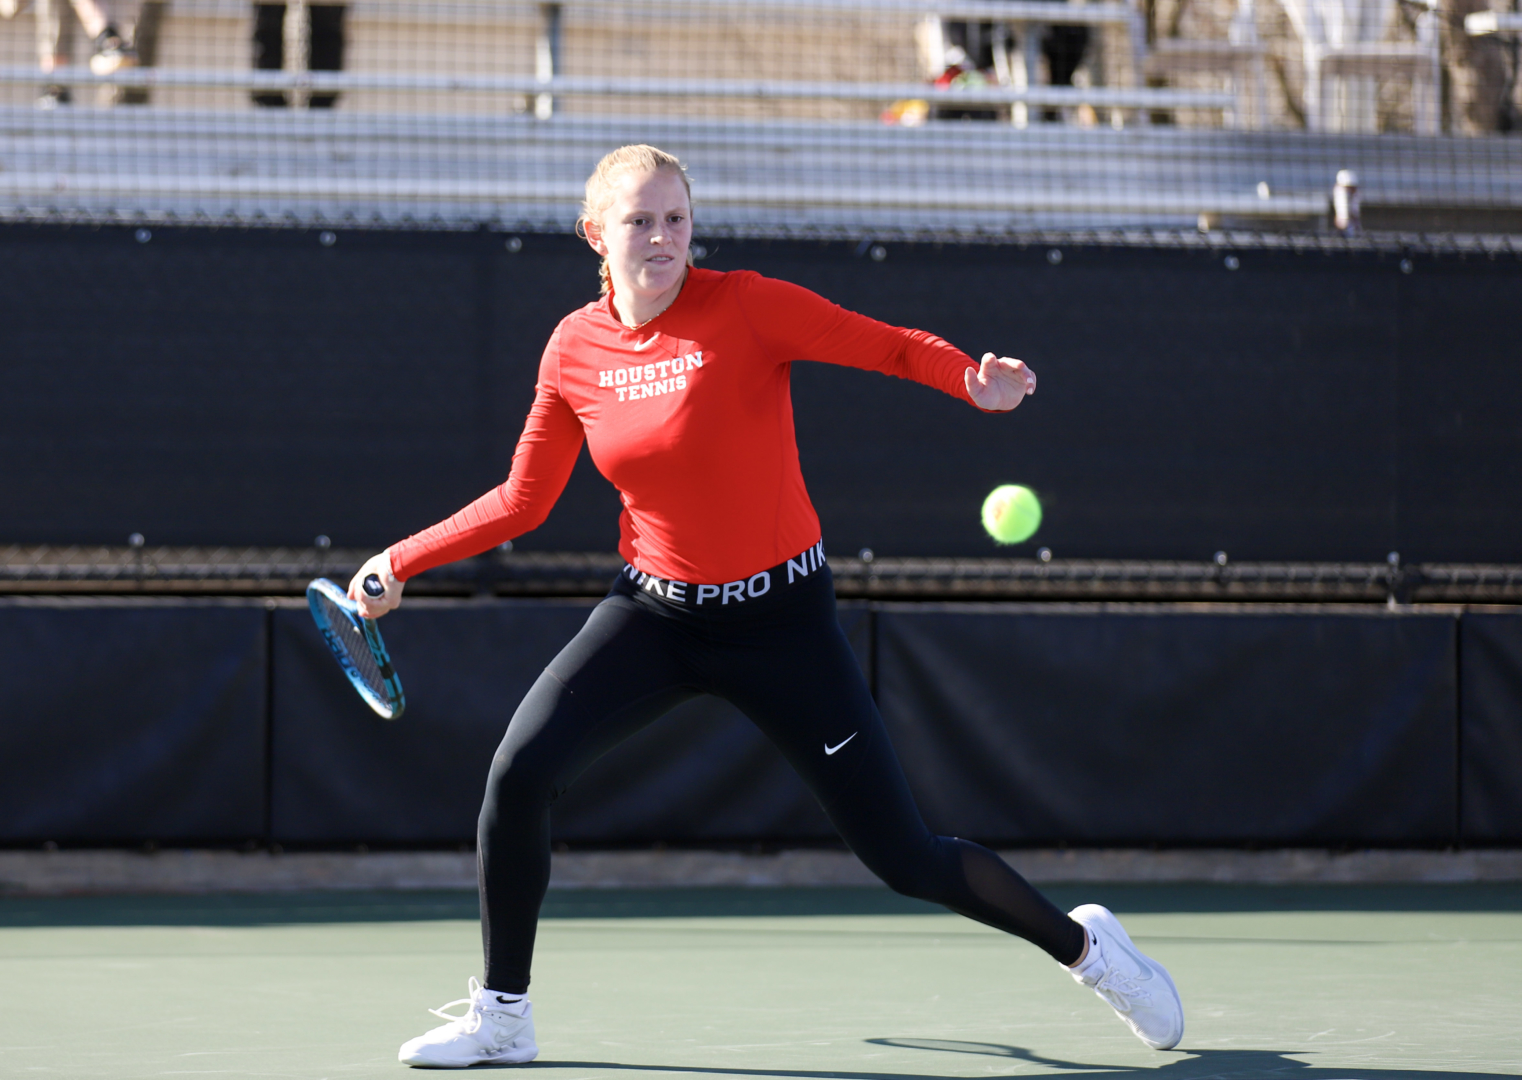 UH tennis continued its stretch of high-level ply with a dominant victory over Louisiana Monroe on Saturday. | James Mueller/The Cougar